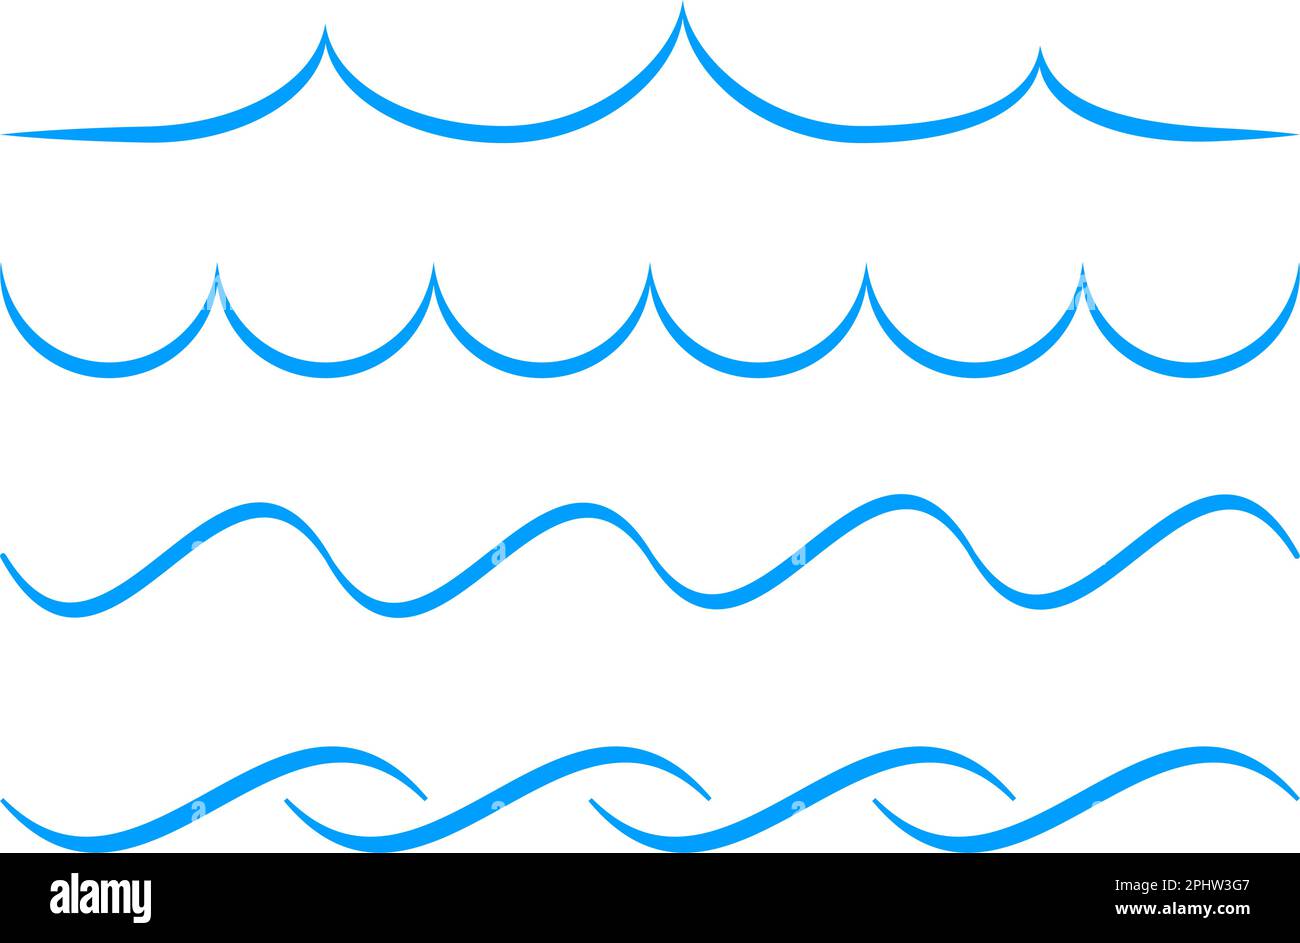 Sea wave icon set. Collection of thin line waves. Flat vector illustration Stock Vector